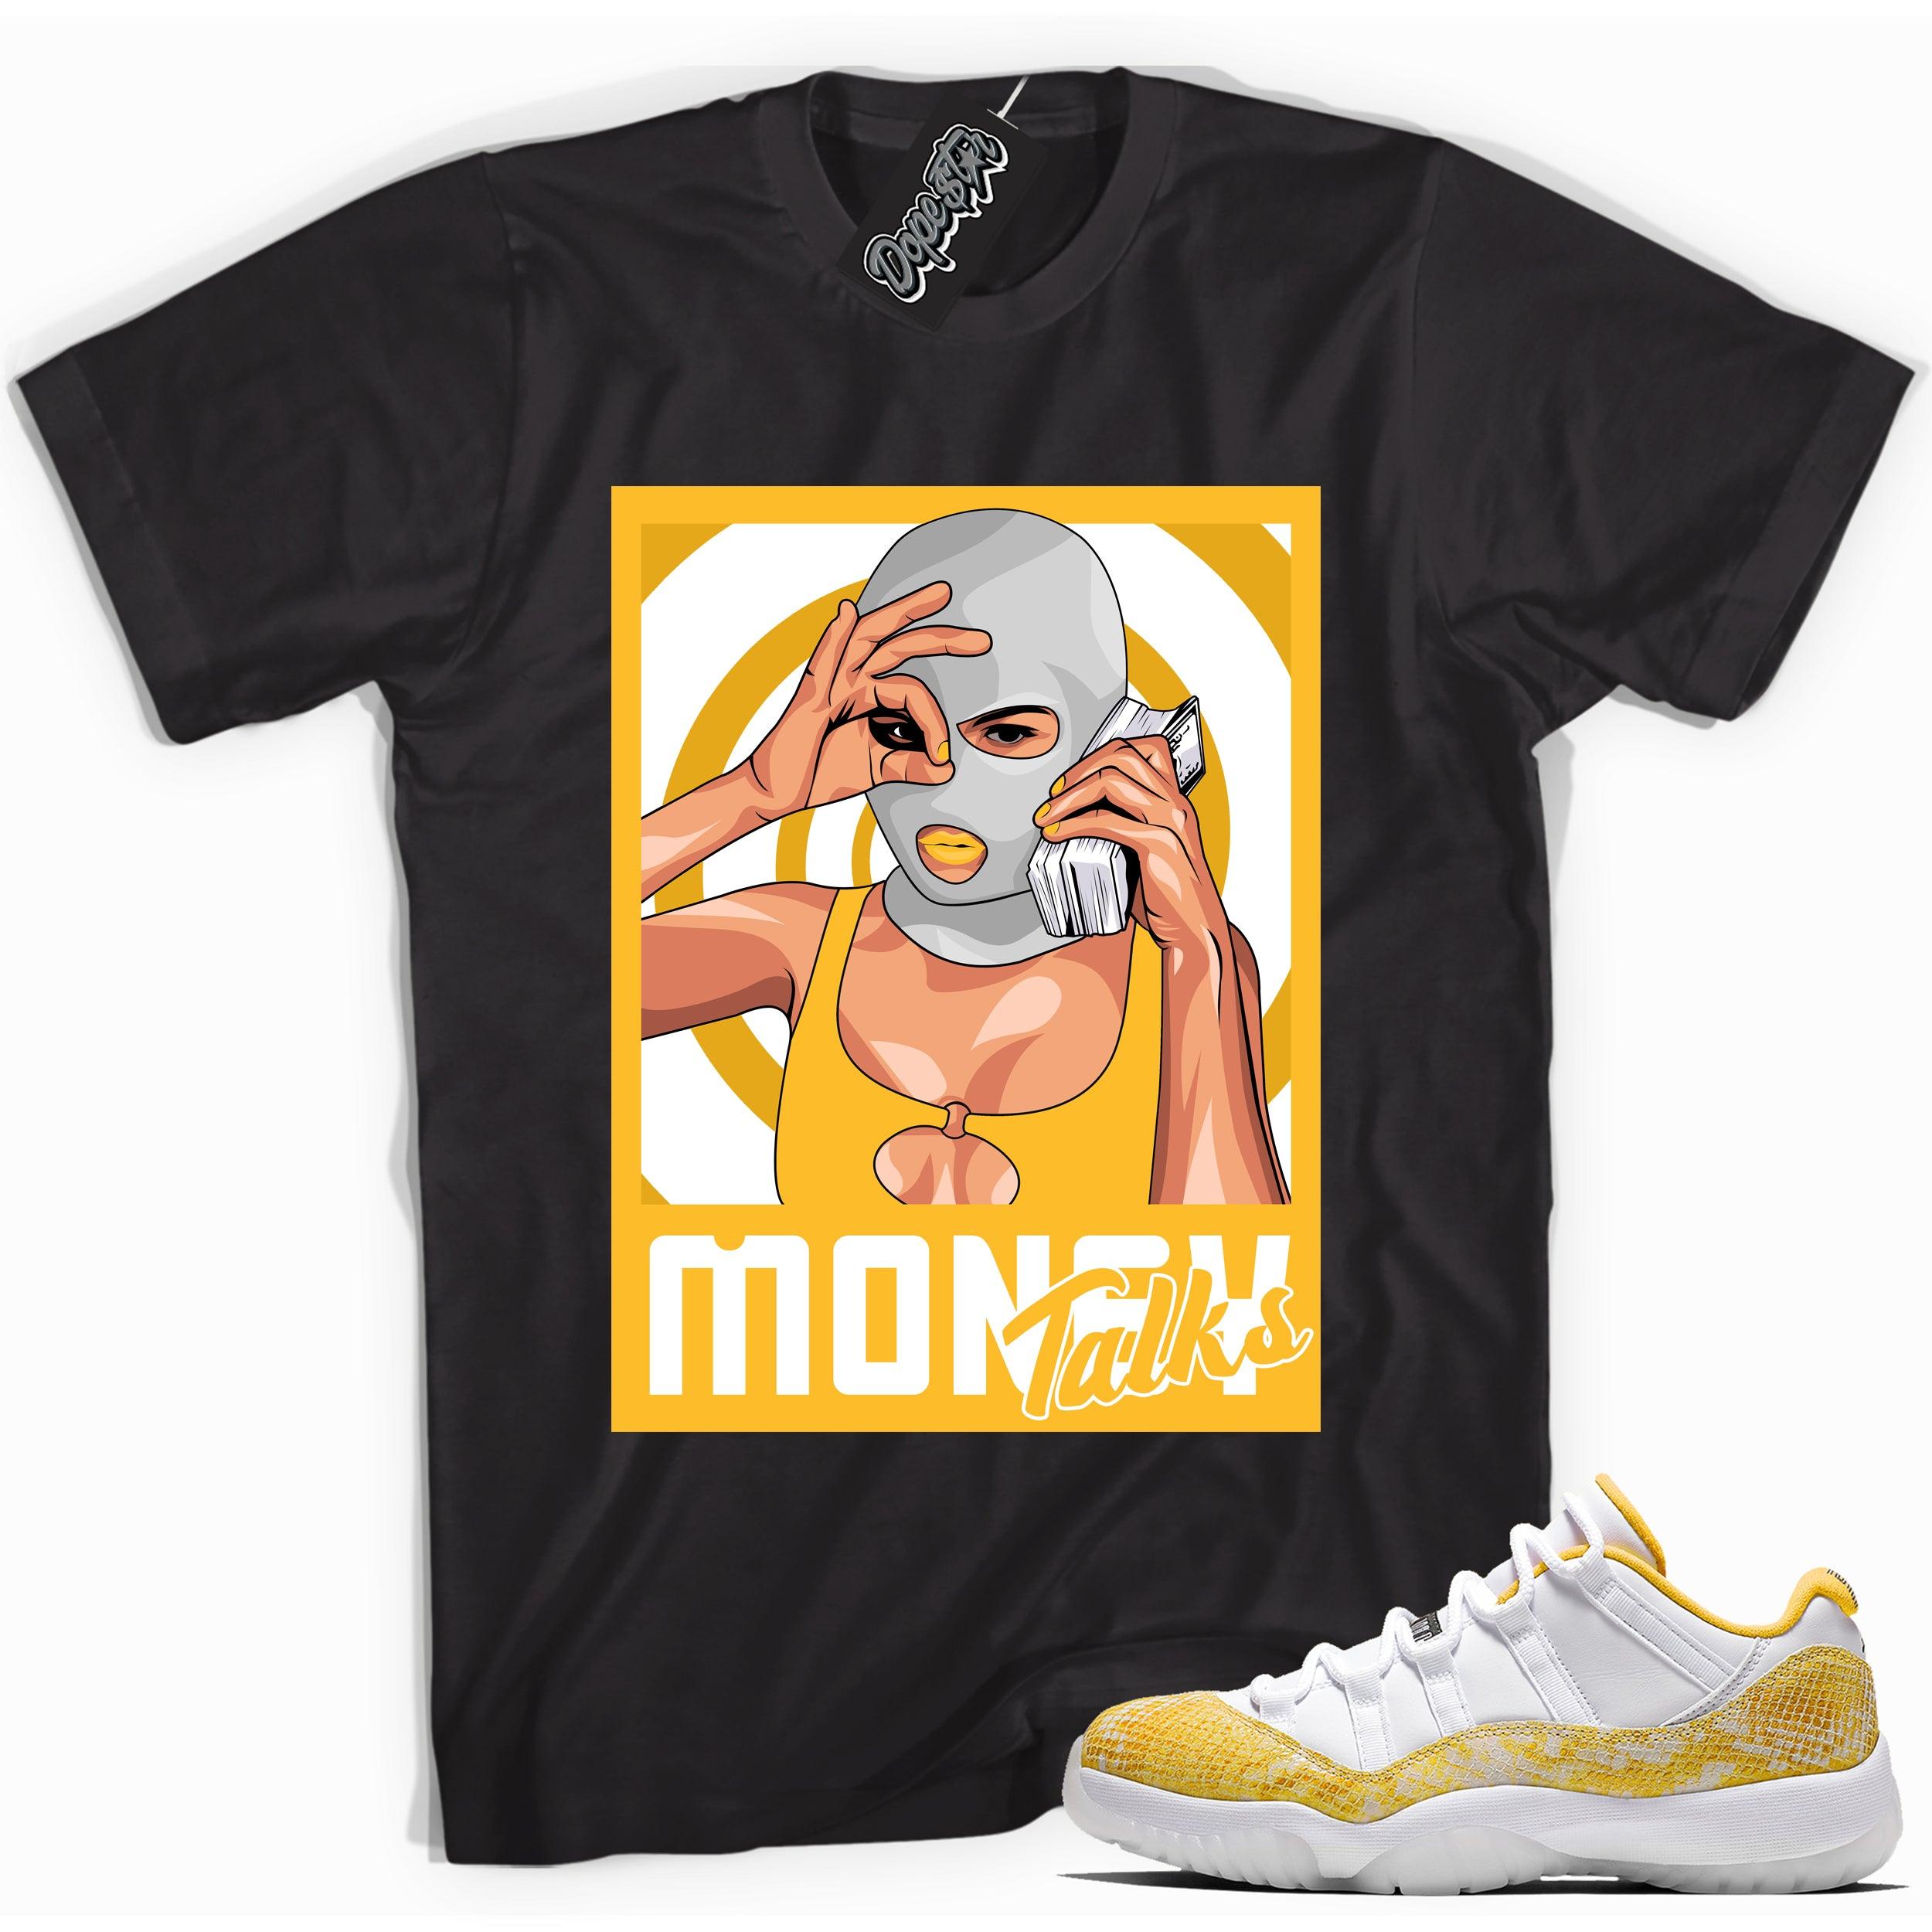 Cool black graphic tee with 'money talks' print, that perfectly matches  Air Jordan 11 Low Yellow Snakeskin sneakers